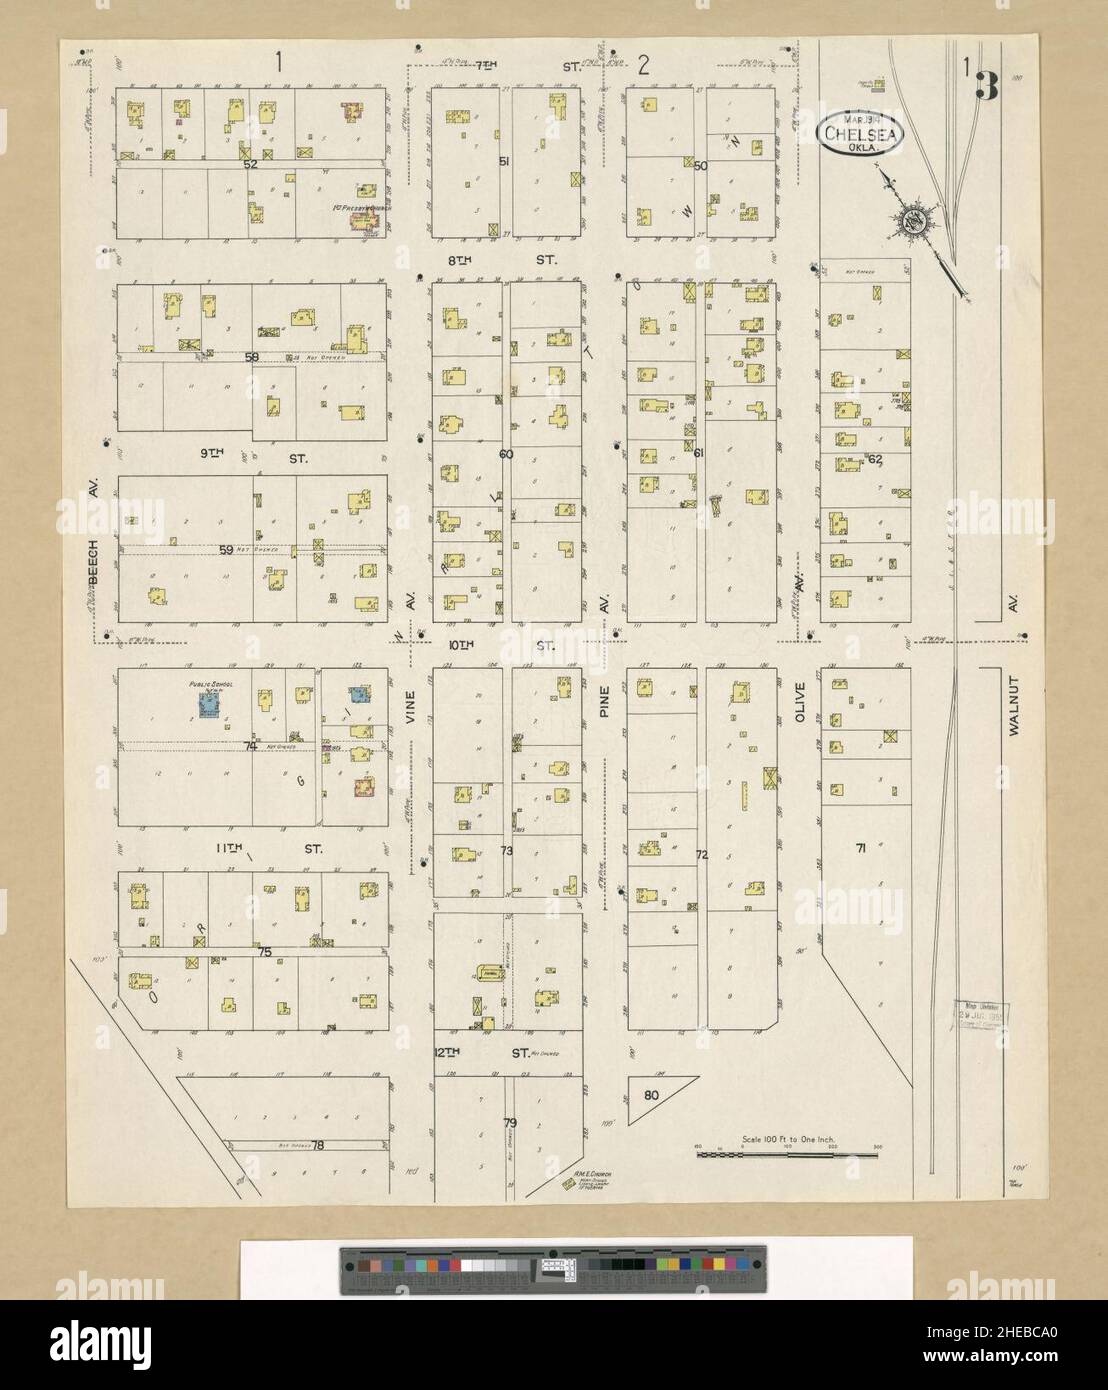 Sanborn Fire Insurance Map From Chelsea Rogers County Oklahoma 2HEBCA0 